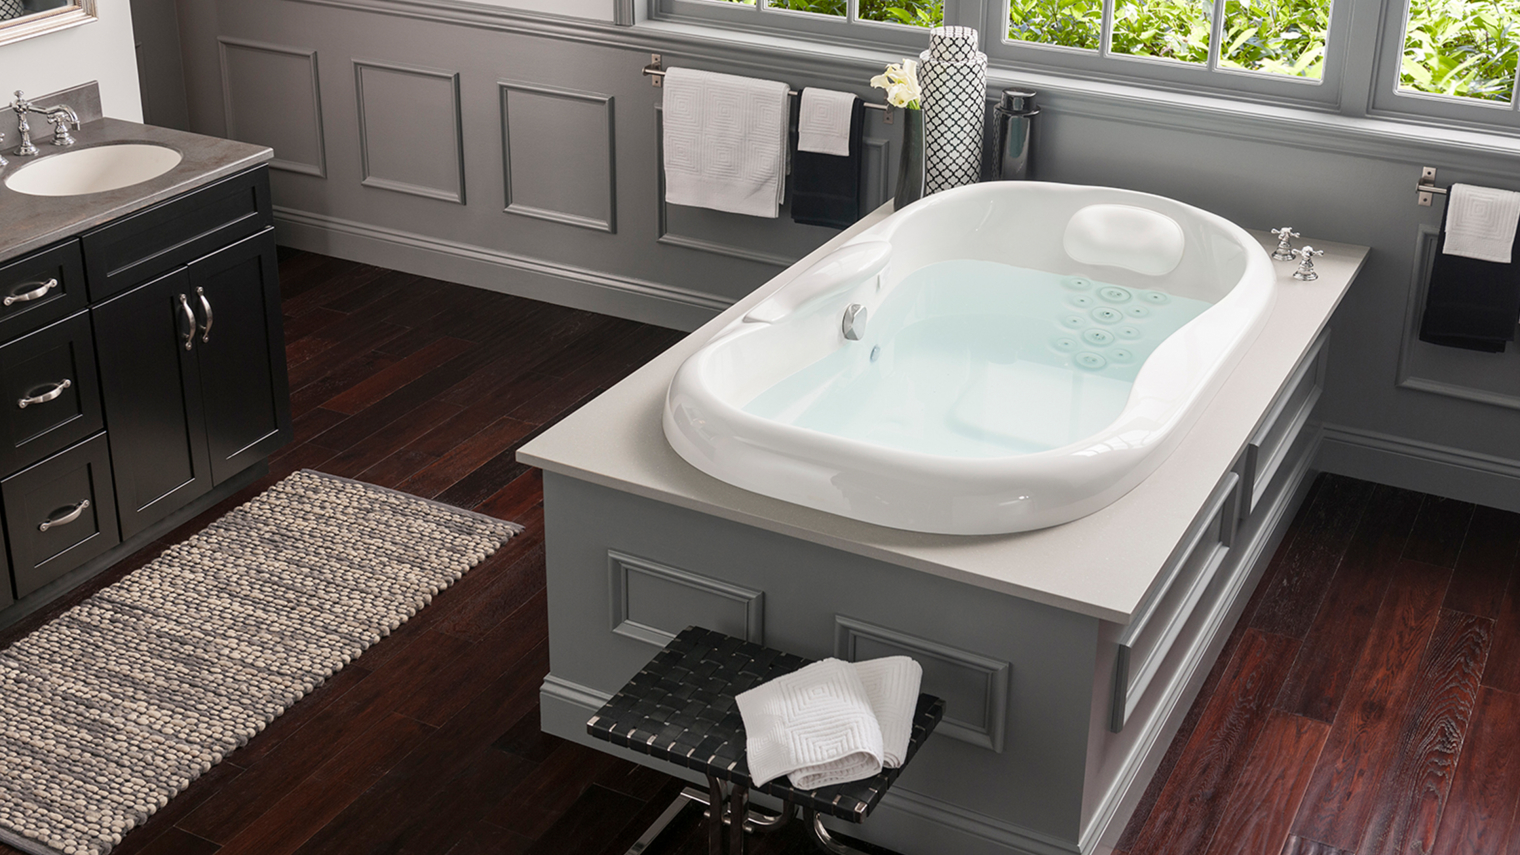 Whirlpool tub with center platform with wood flooring in the middle of the bathroom.